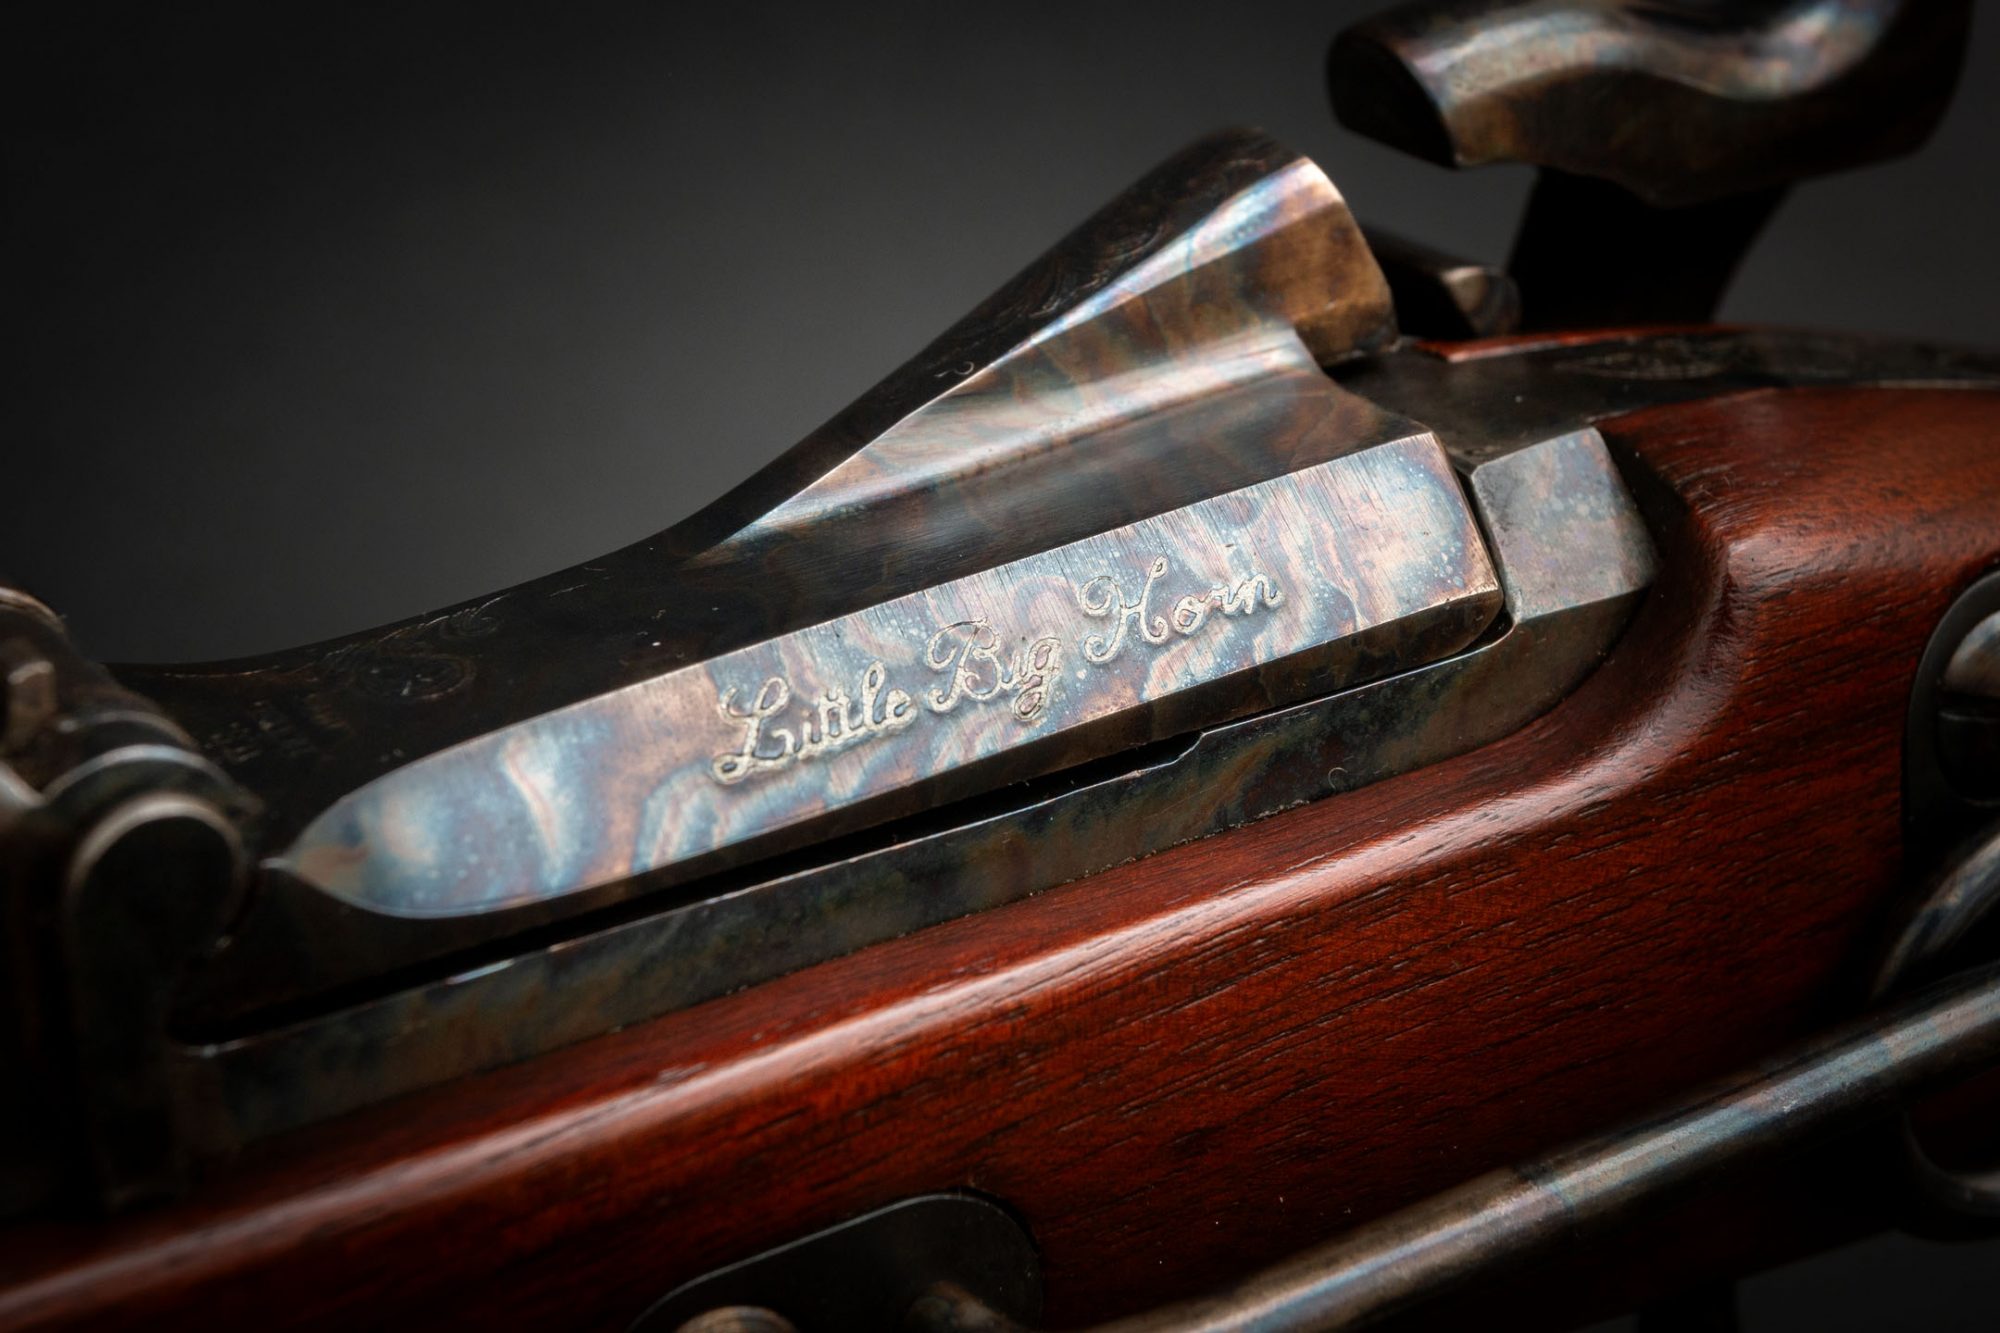 H&R U.S. Model 1873 Trapdoor Carbine in 45-70 Govt., for sale by Turnbull Restoration Co. of Bloomfield, NY